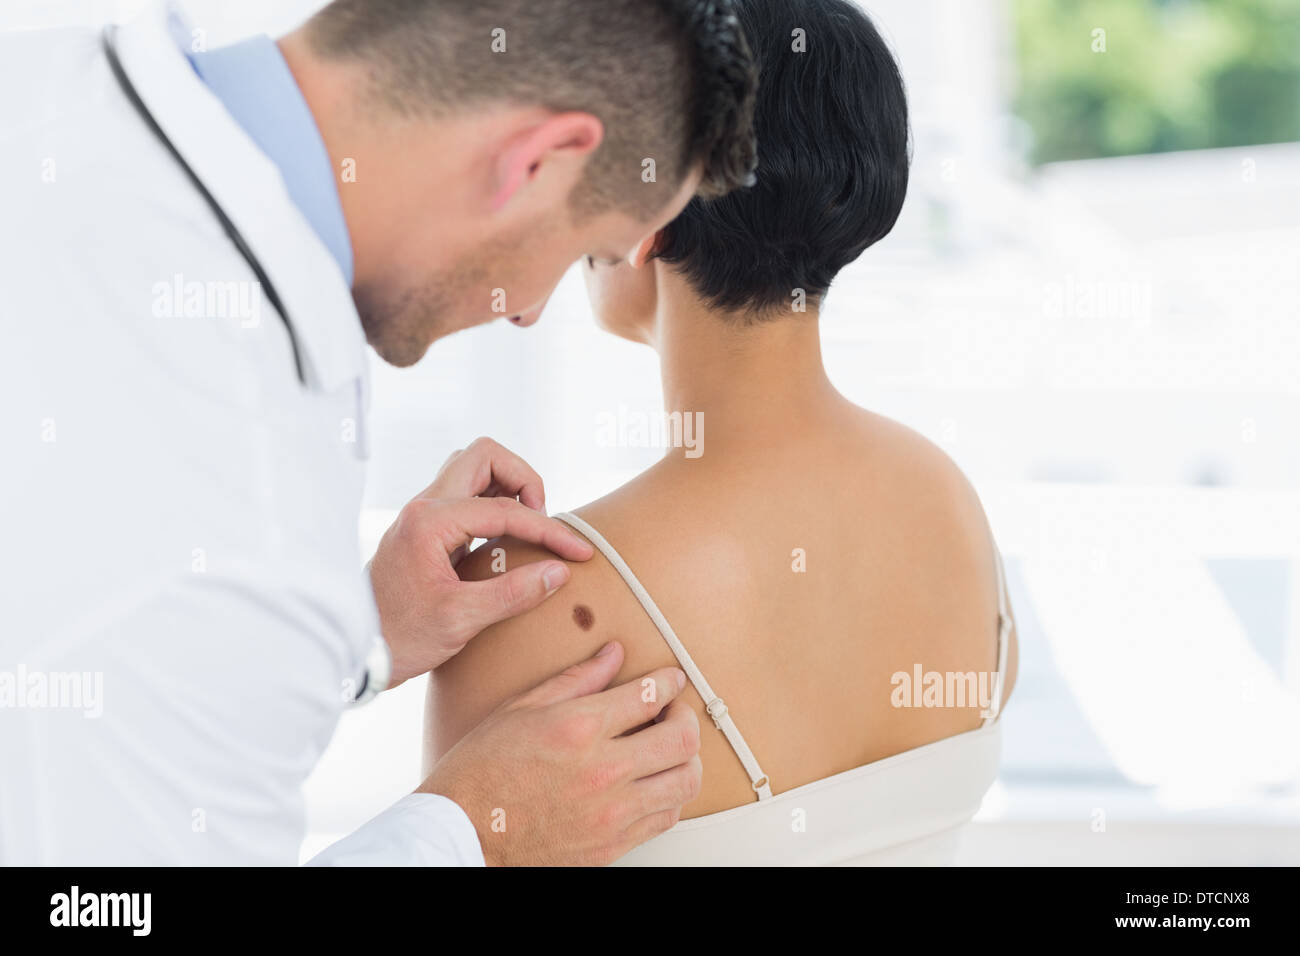 Doctor examining mole on back of woman Stock Photo